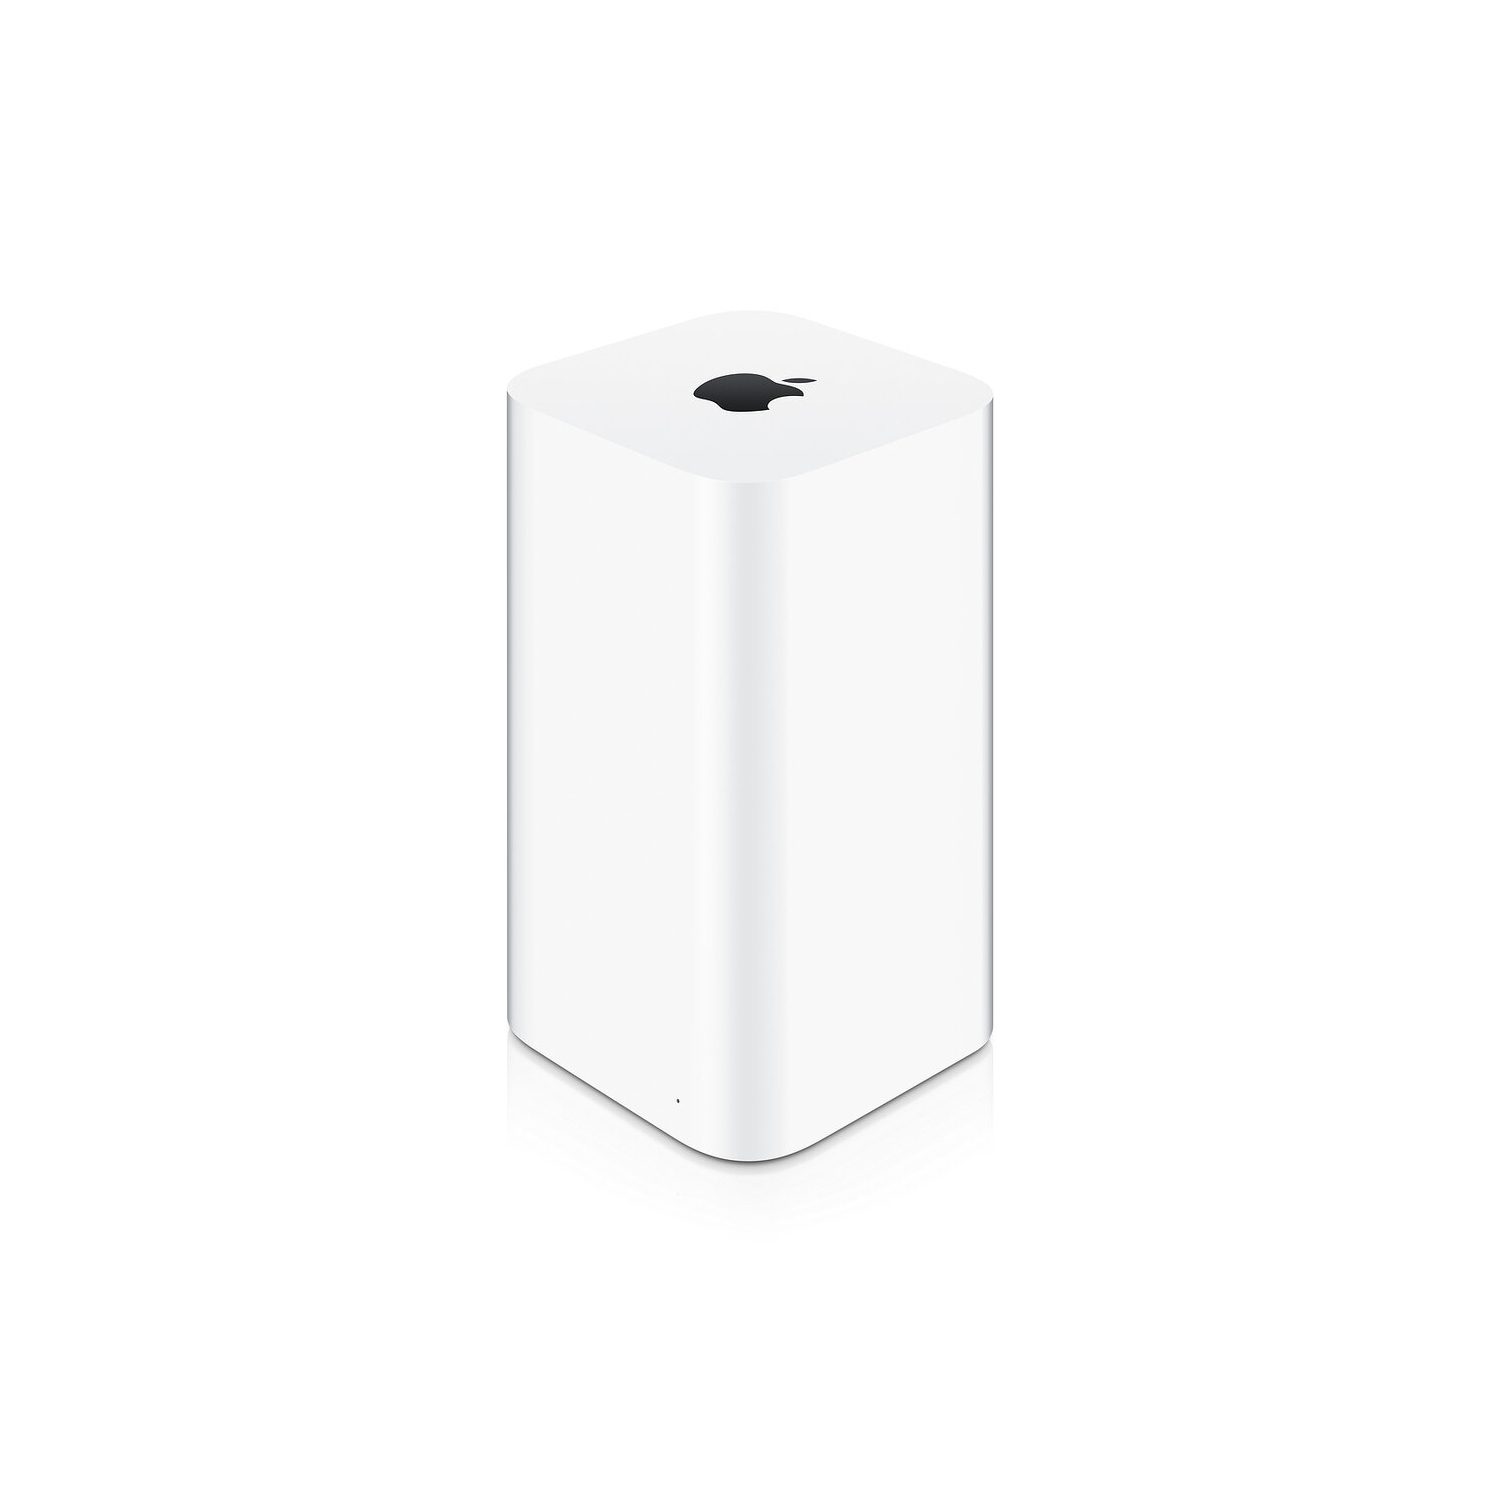 Apple AirPort Extreme Base Station - wireless access point - ME918AM/A